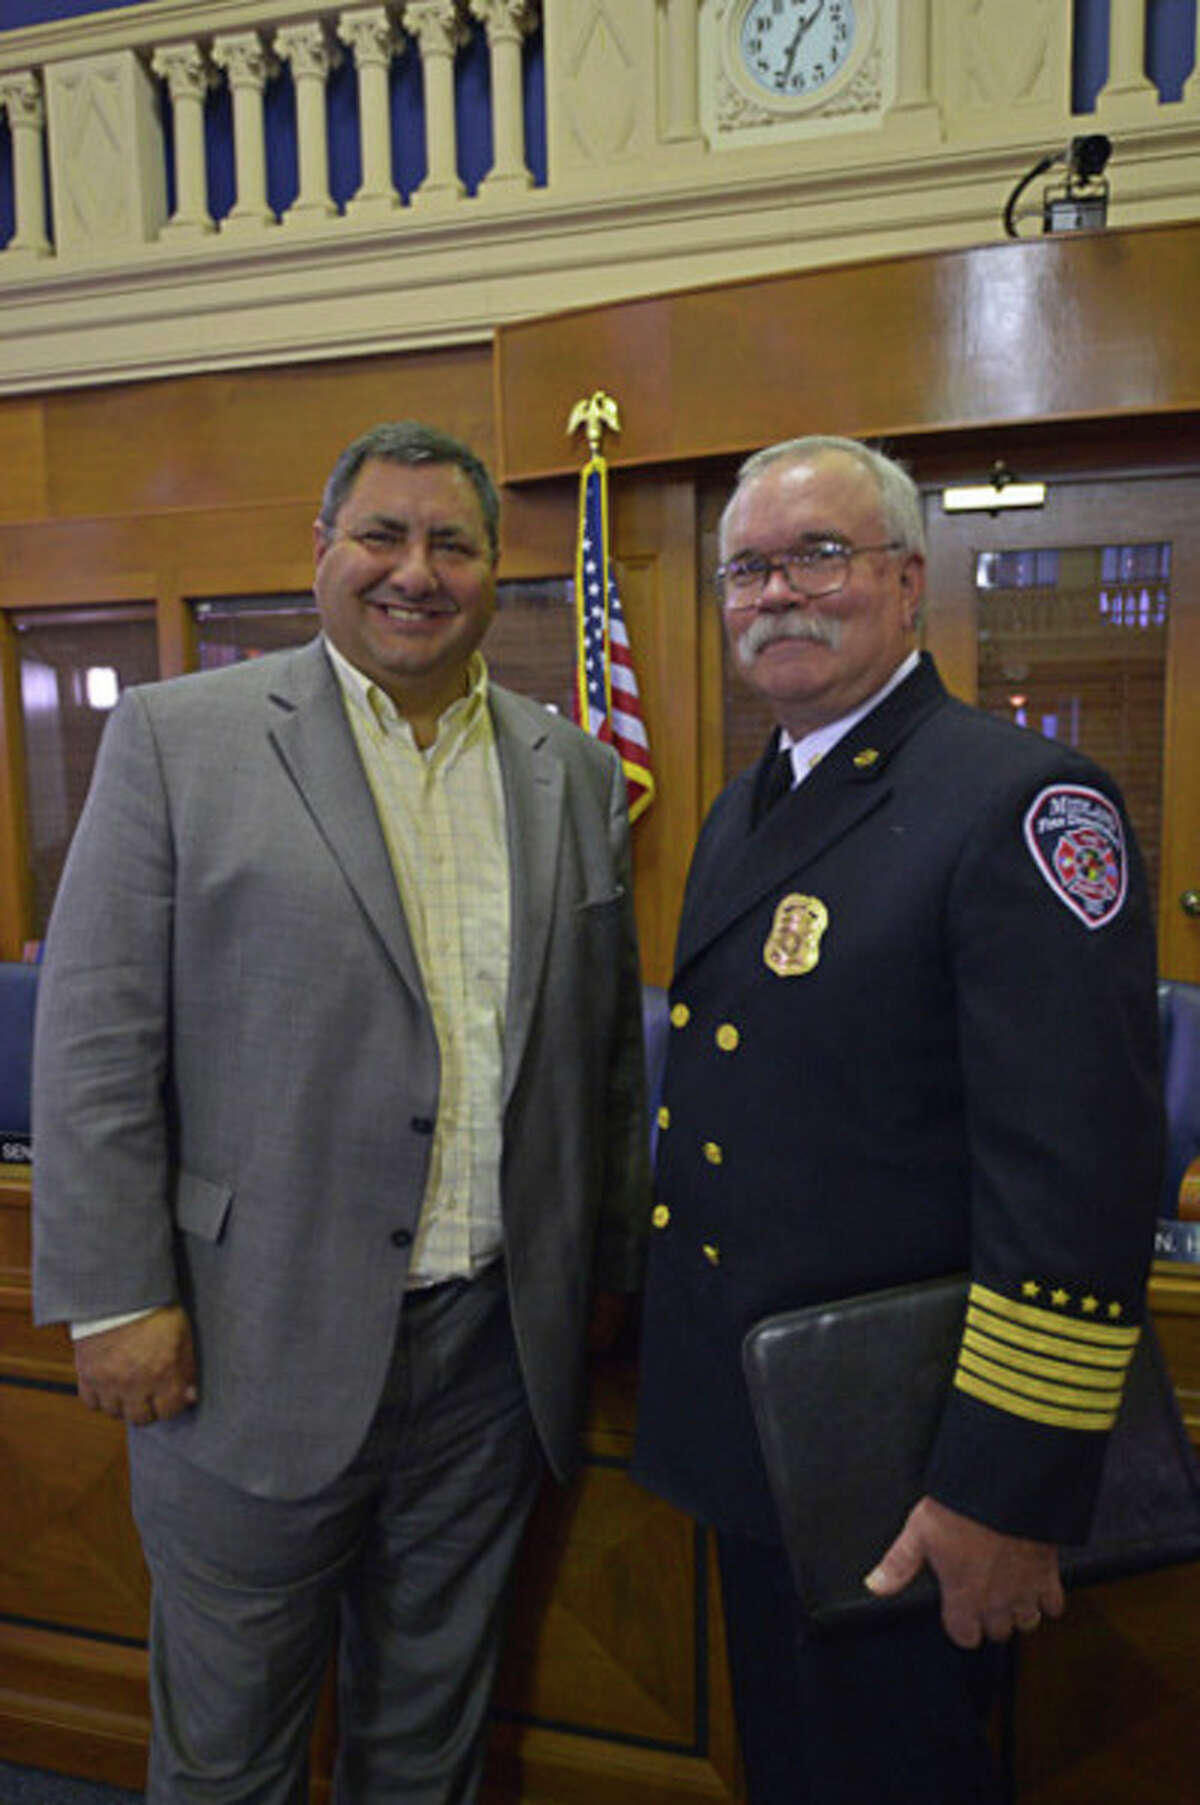 State Sen. Jim Stamas, left, with Midland Fire Chief Chris Coughlin before Stamas underwent bariatric surgery and lost nearly 100 pounds.